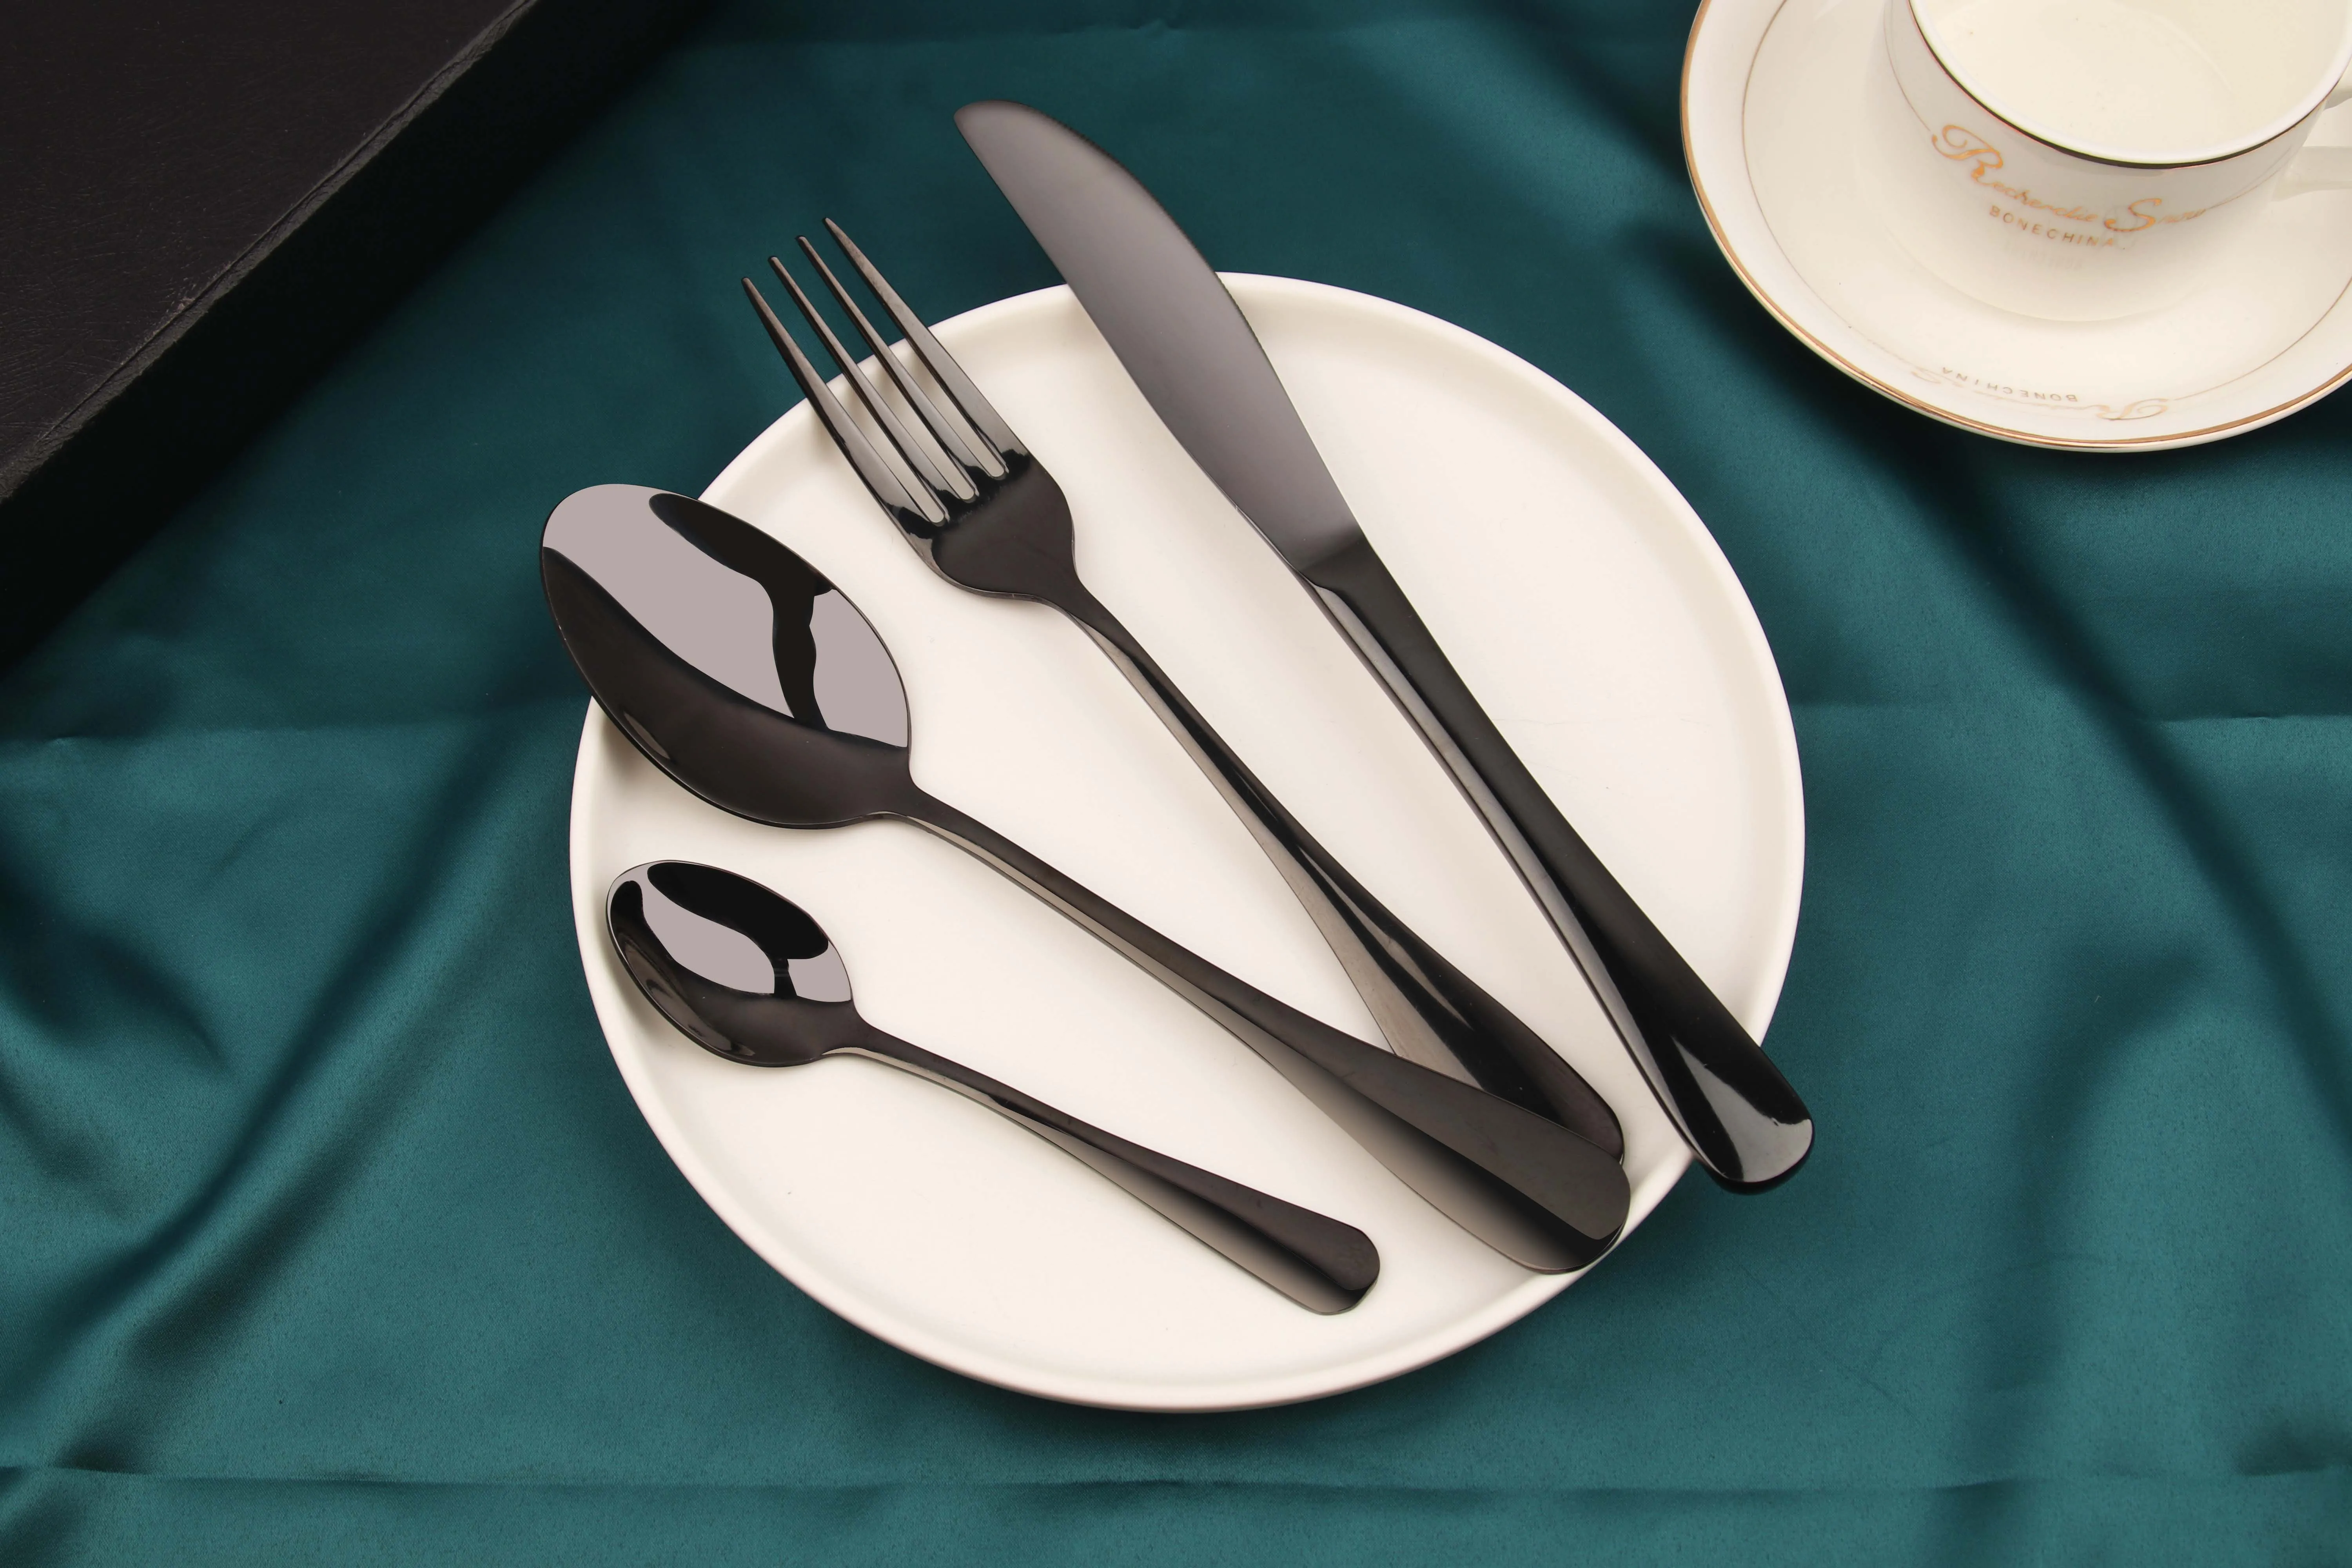 quality cutlery sets